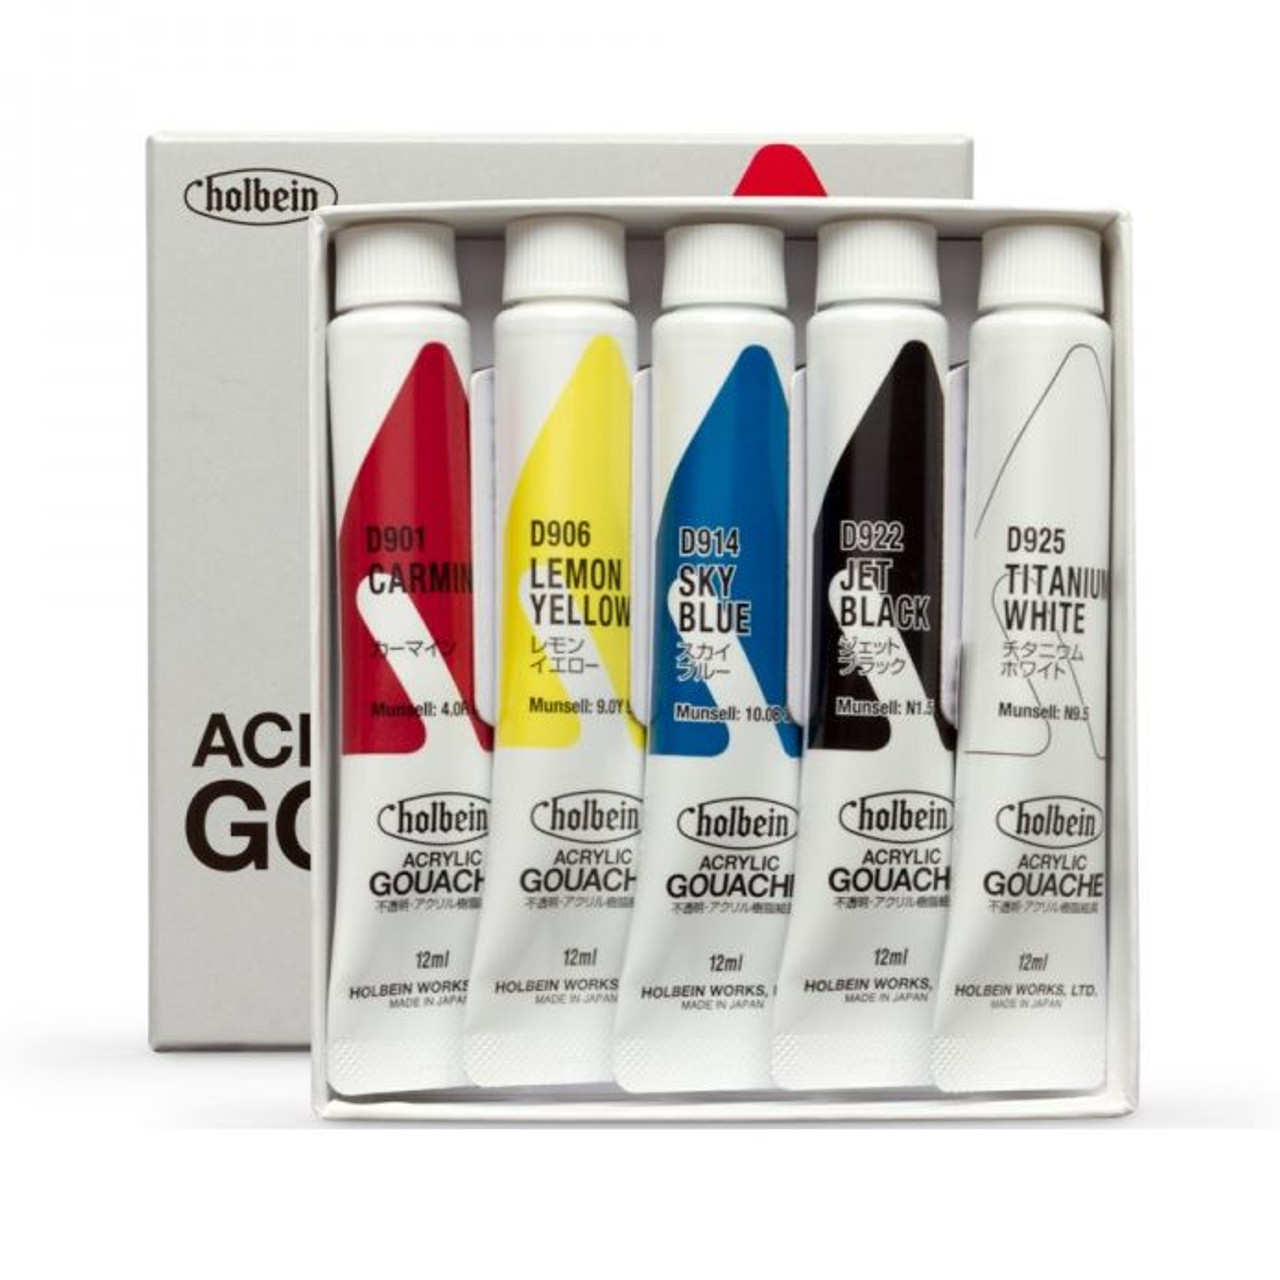 Holbein Artists' Gouache 5 x 15ml Primary Color Mixing Set